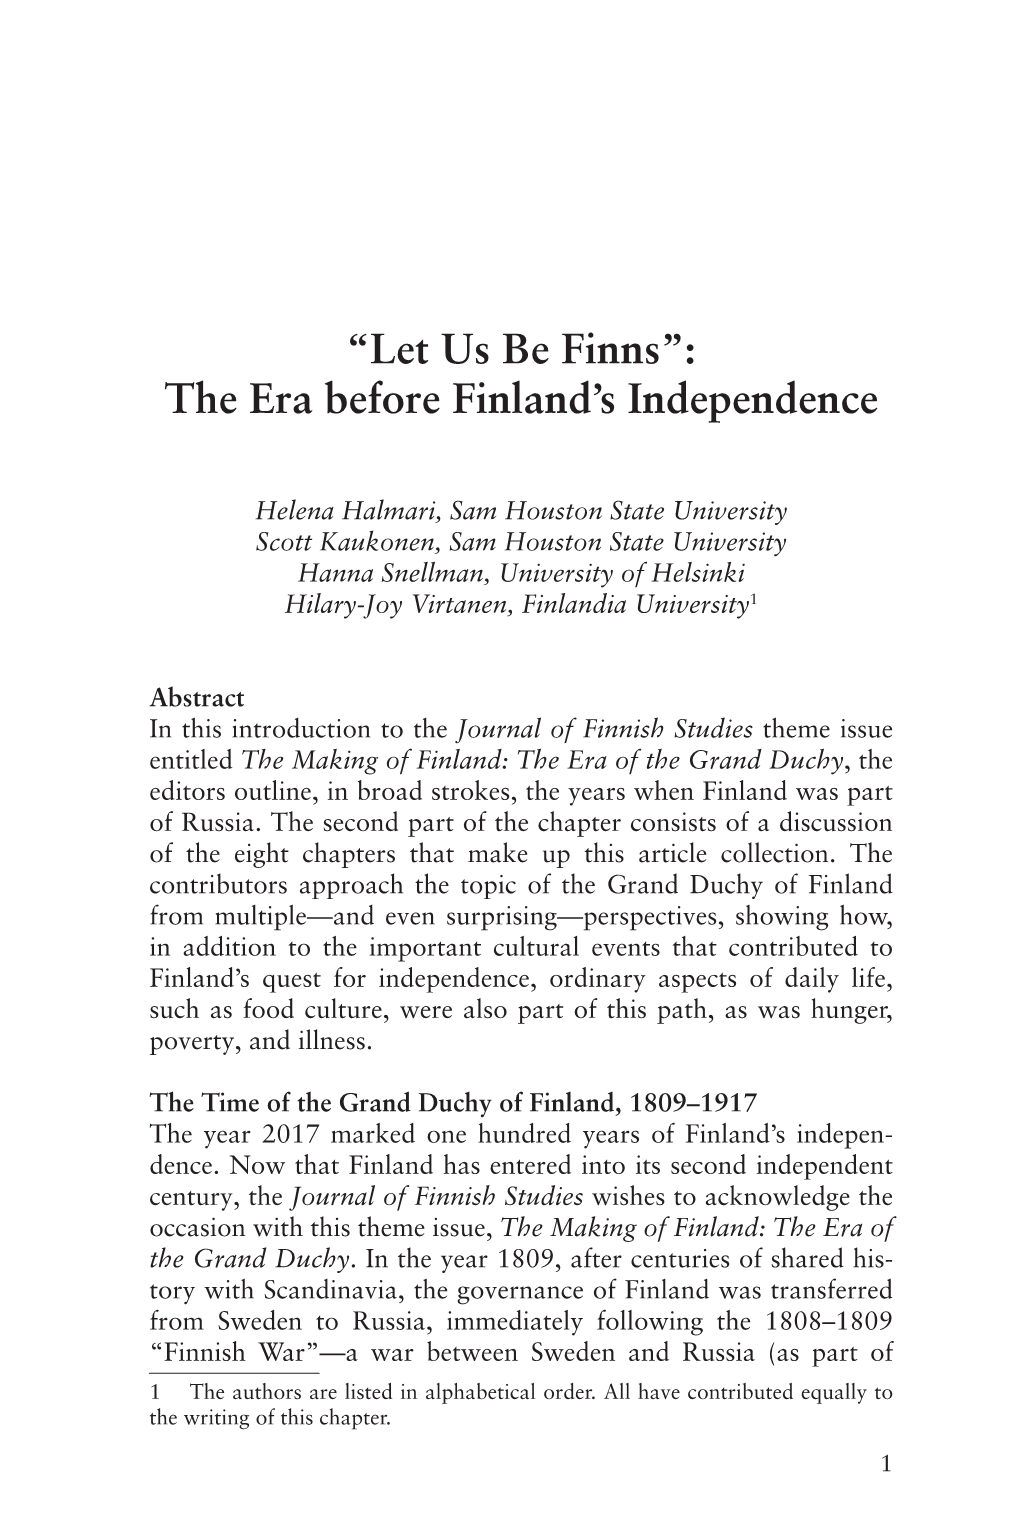 “Let Us Be Finns”: the Era Before Finland's Independence